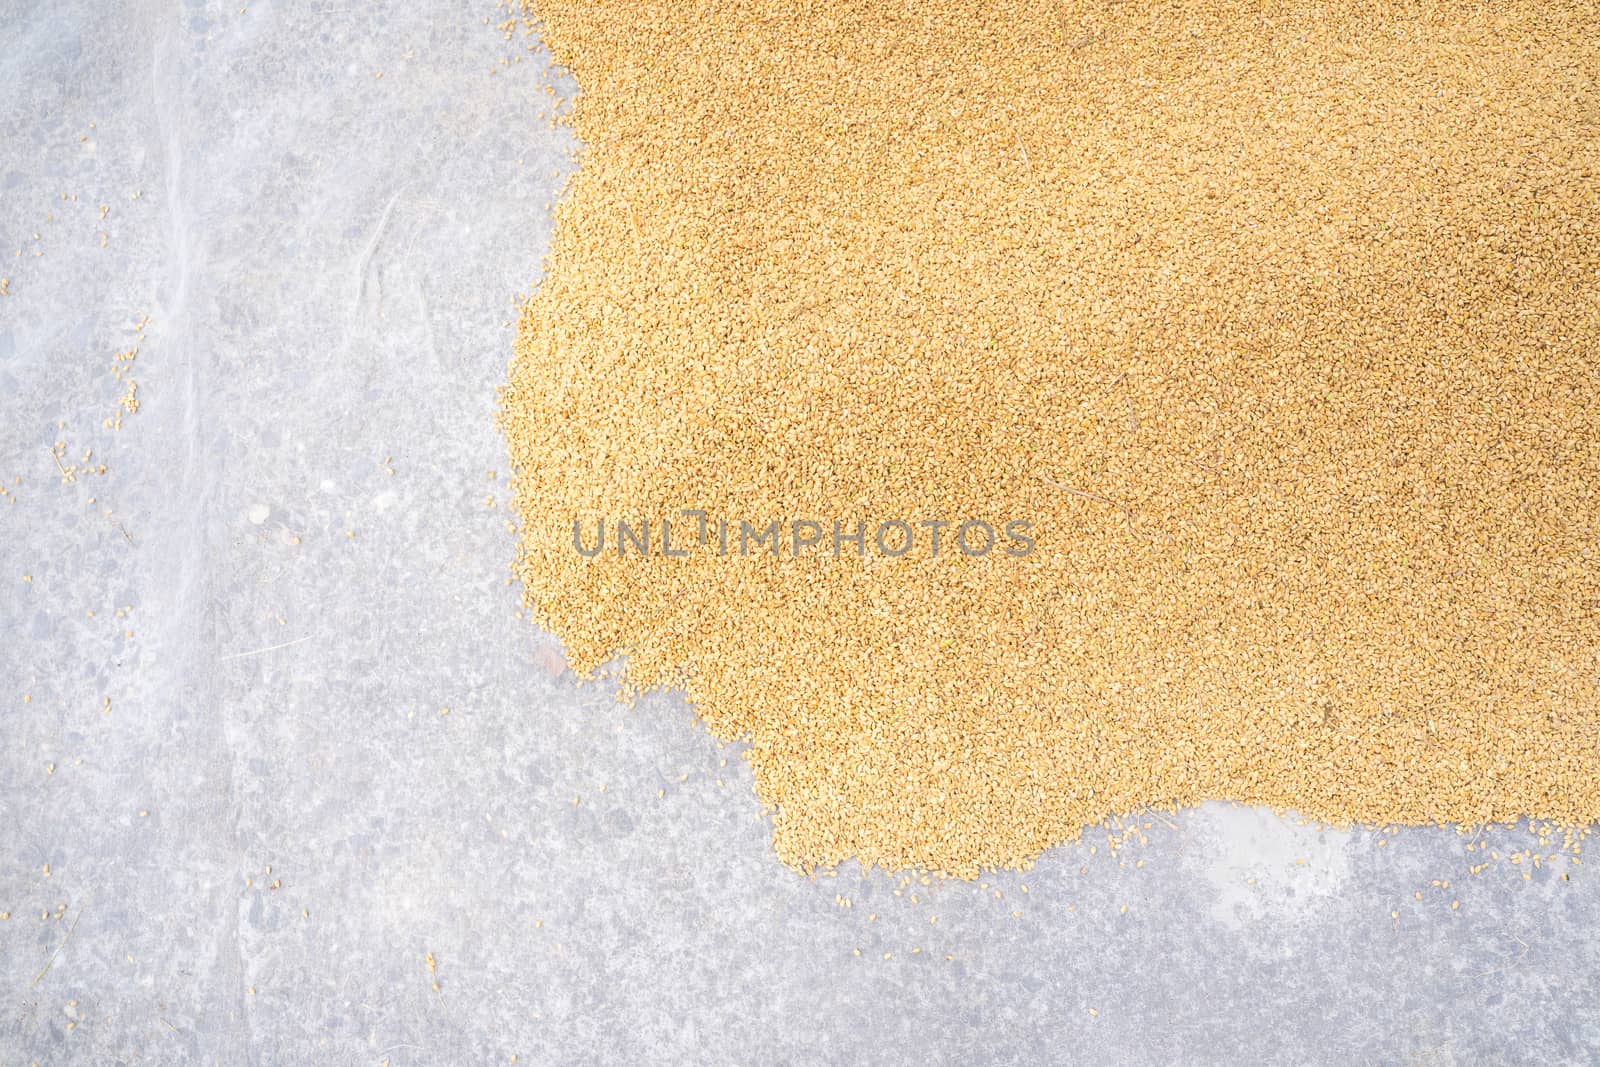 Raw rice crop exposured with sunlight on a white cotton cloth ou by ROMIXIMAGE